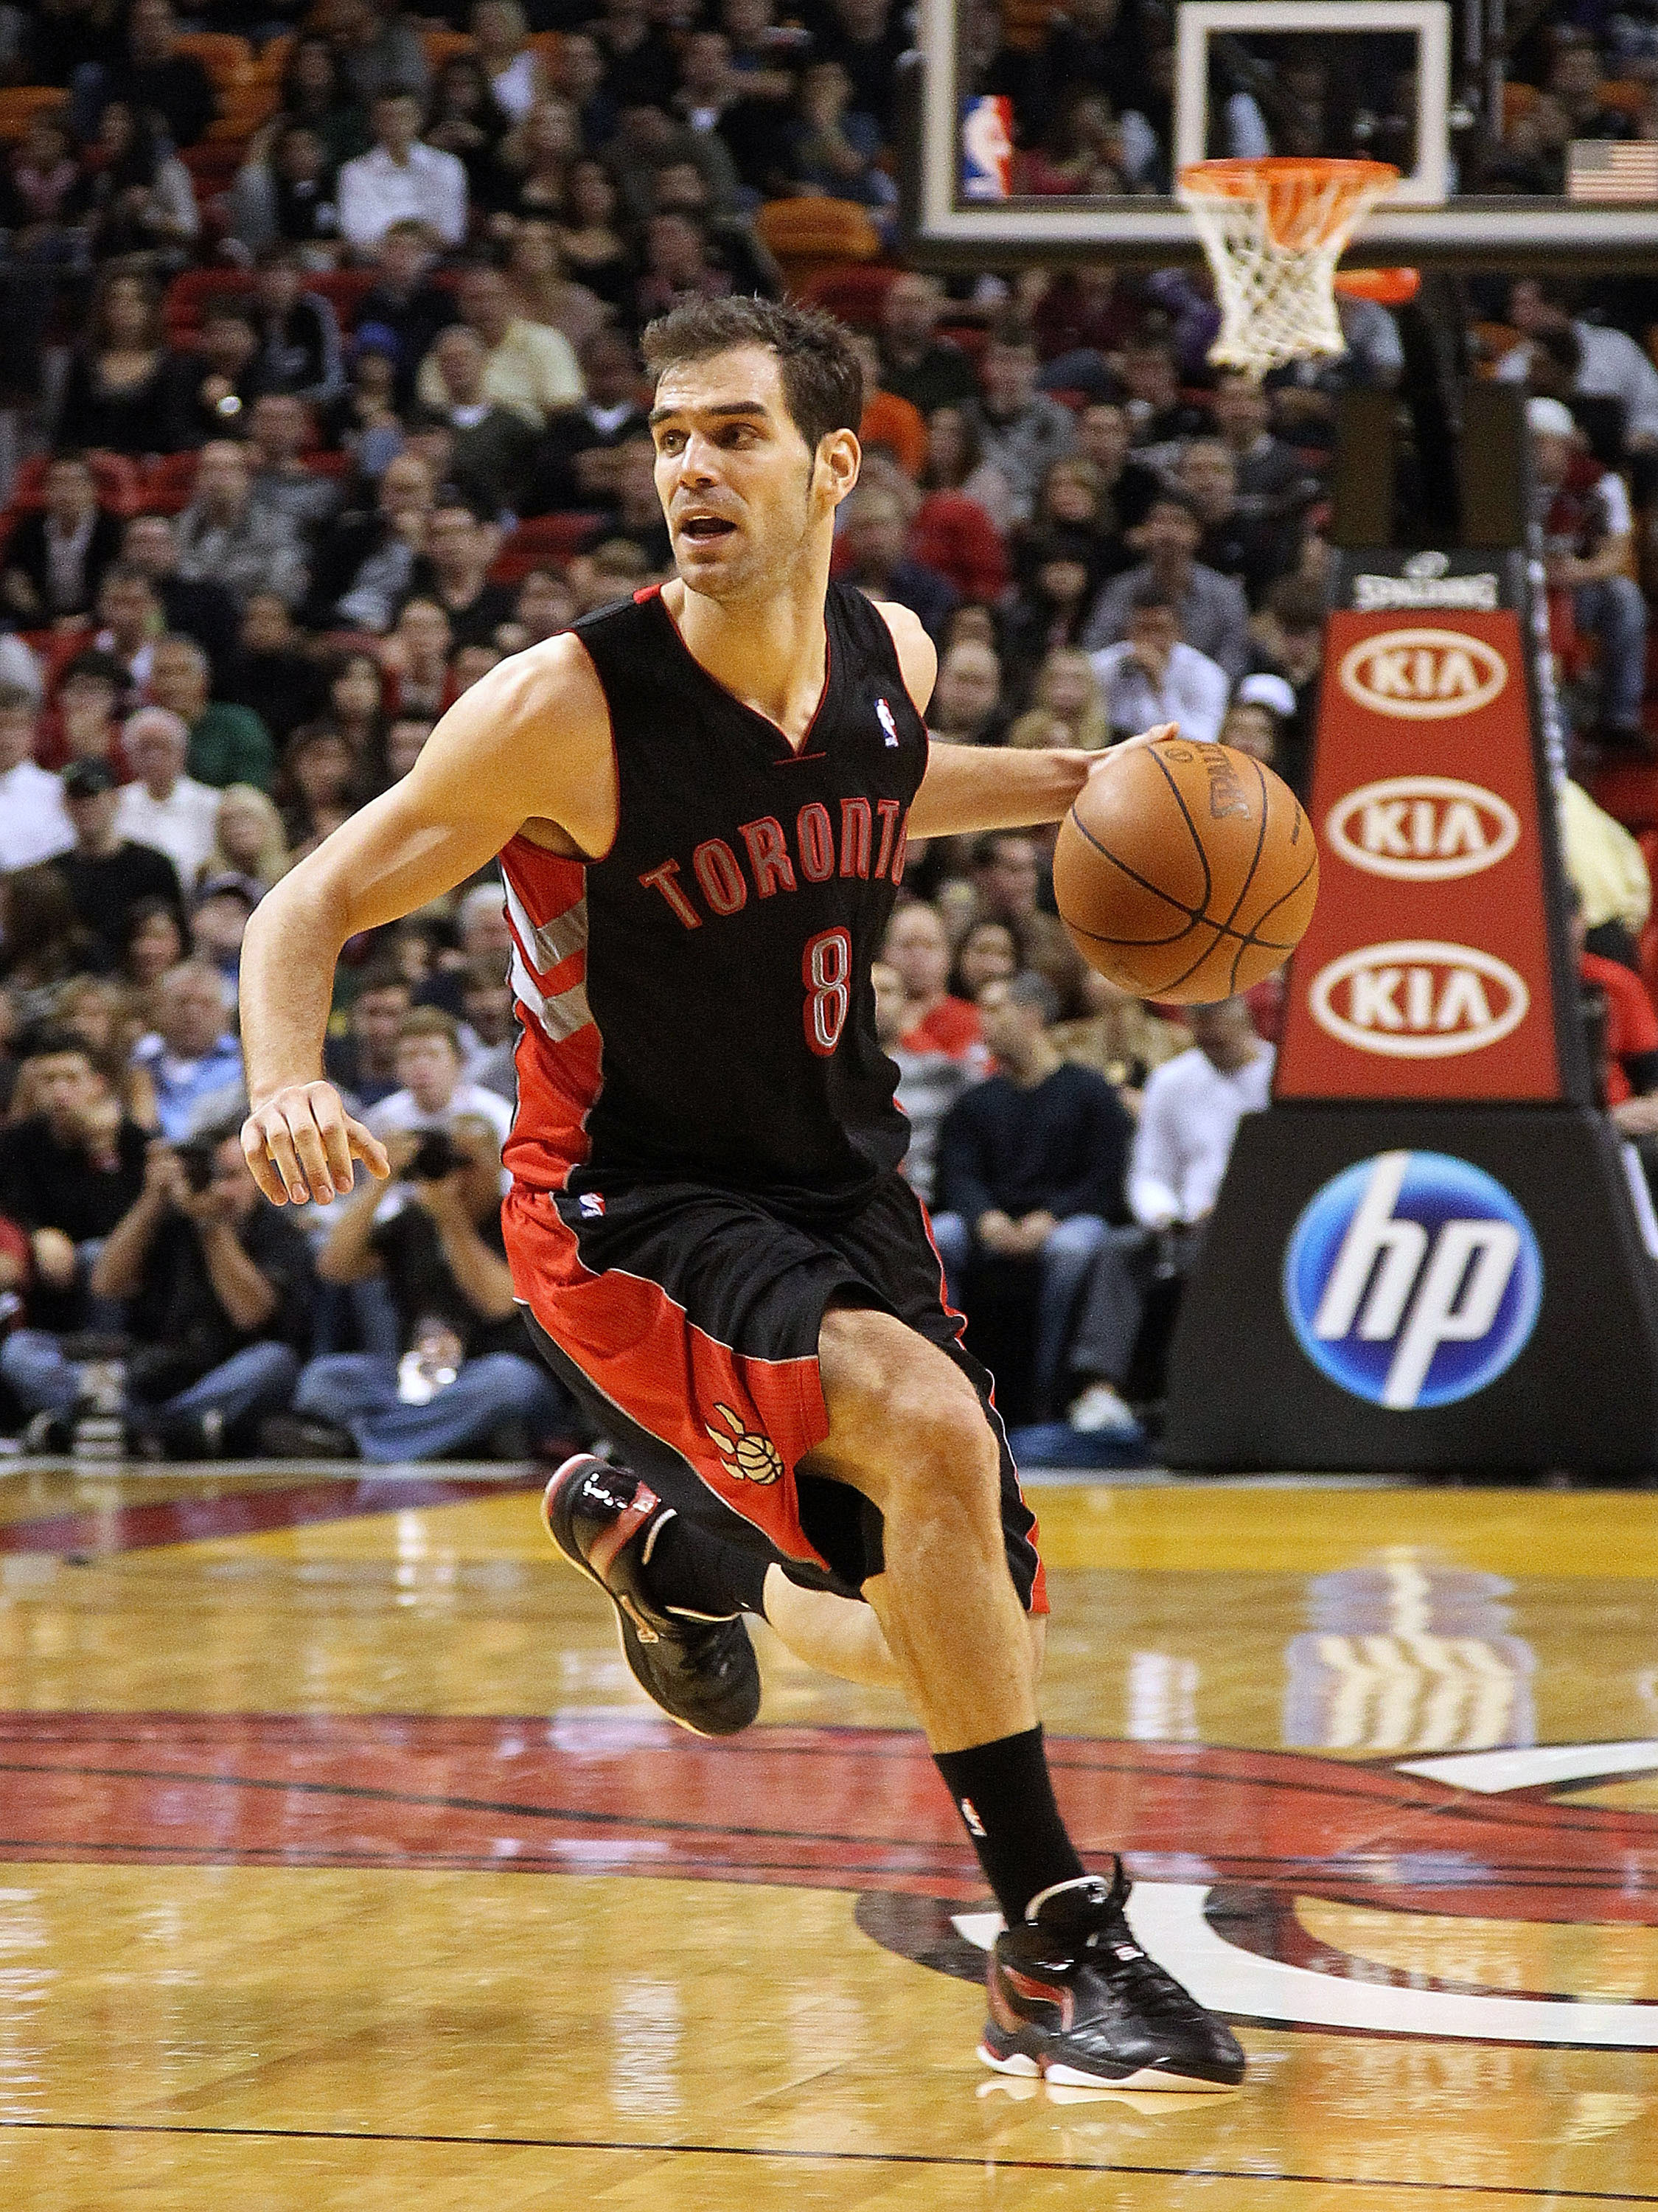 MIAMI, FL - JANUARY 22:  Jose Calderon #8 of the Toronto Raptors dribbles the ball during a game against the Miami Heat at American Airlines Arena on January 22, 2011 in Miami, Florida. NOTE TO USER: User expressly acknowledges and agrees that, by downloa